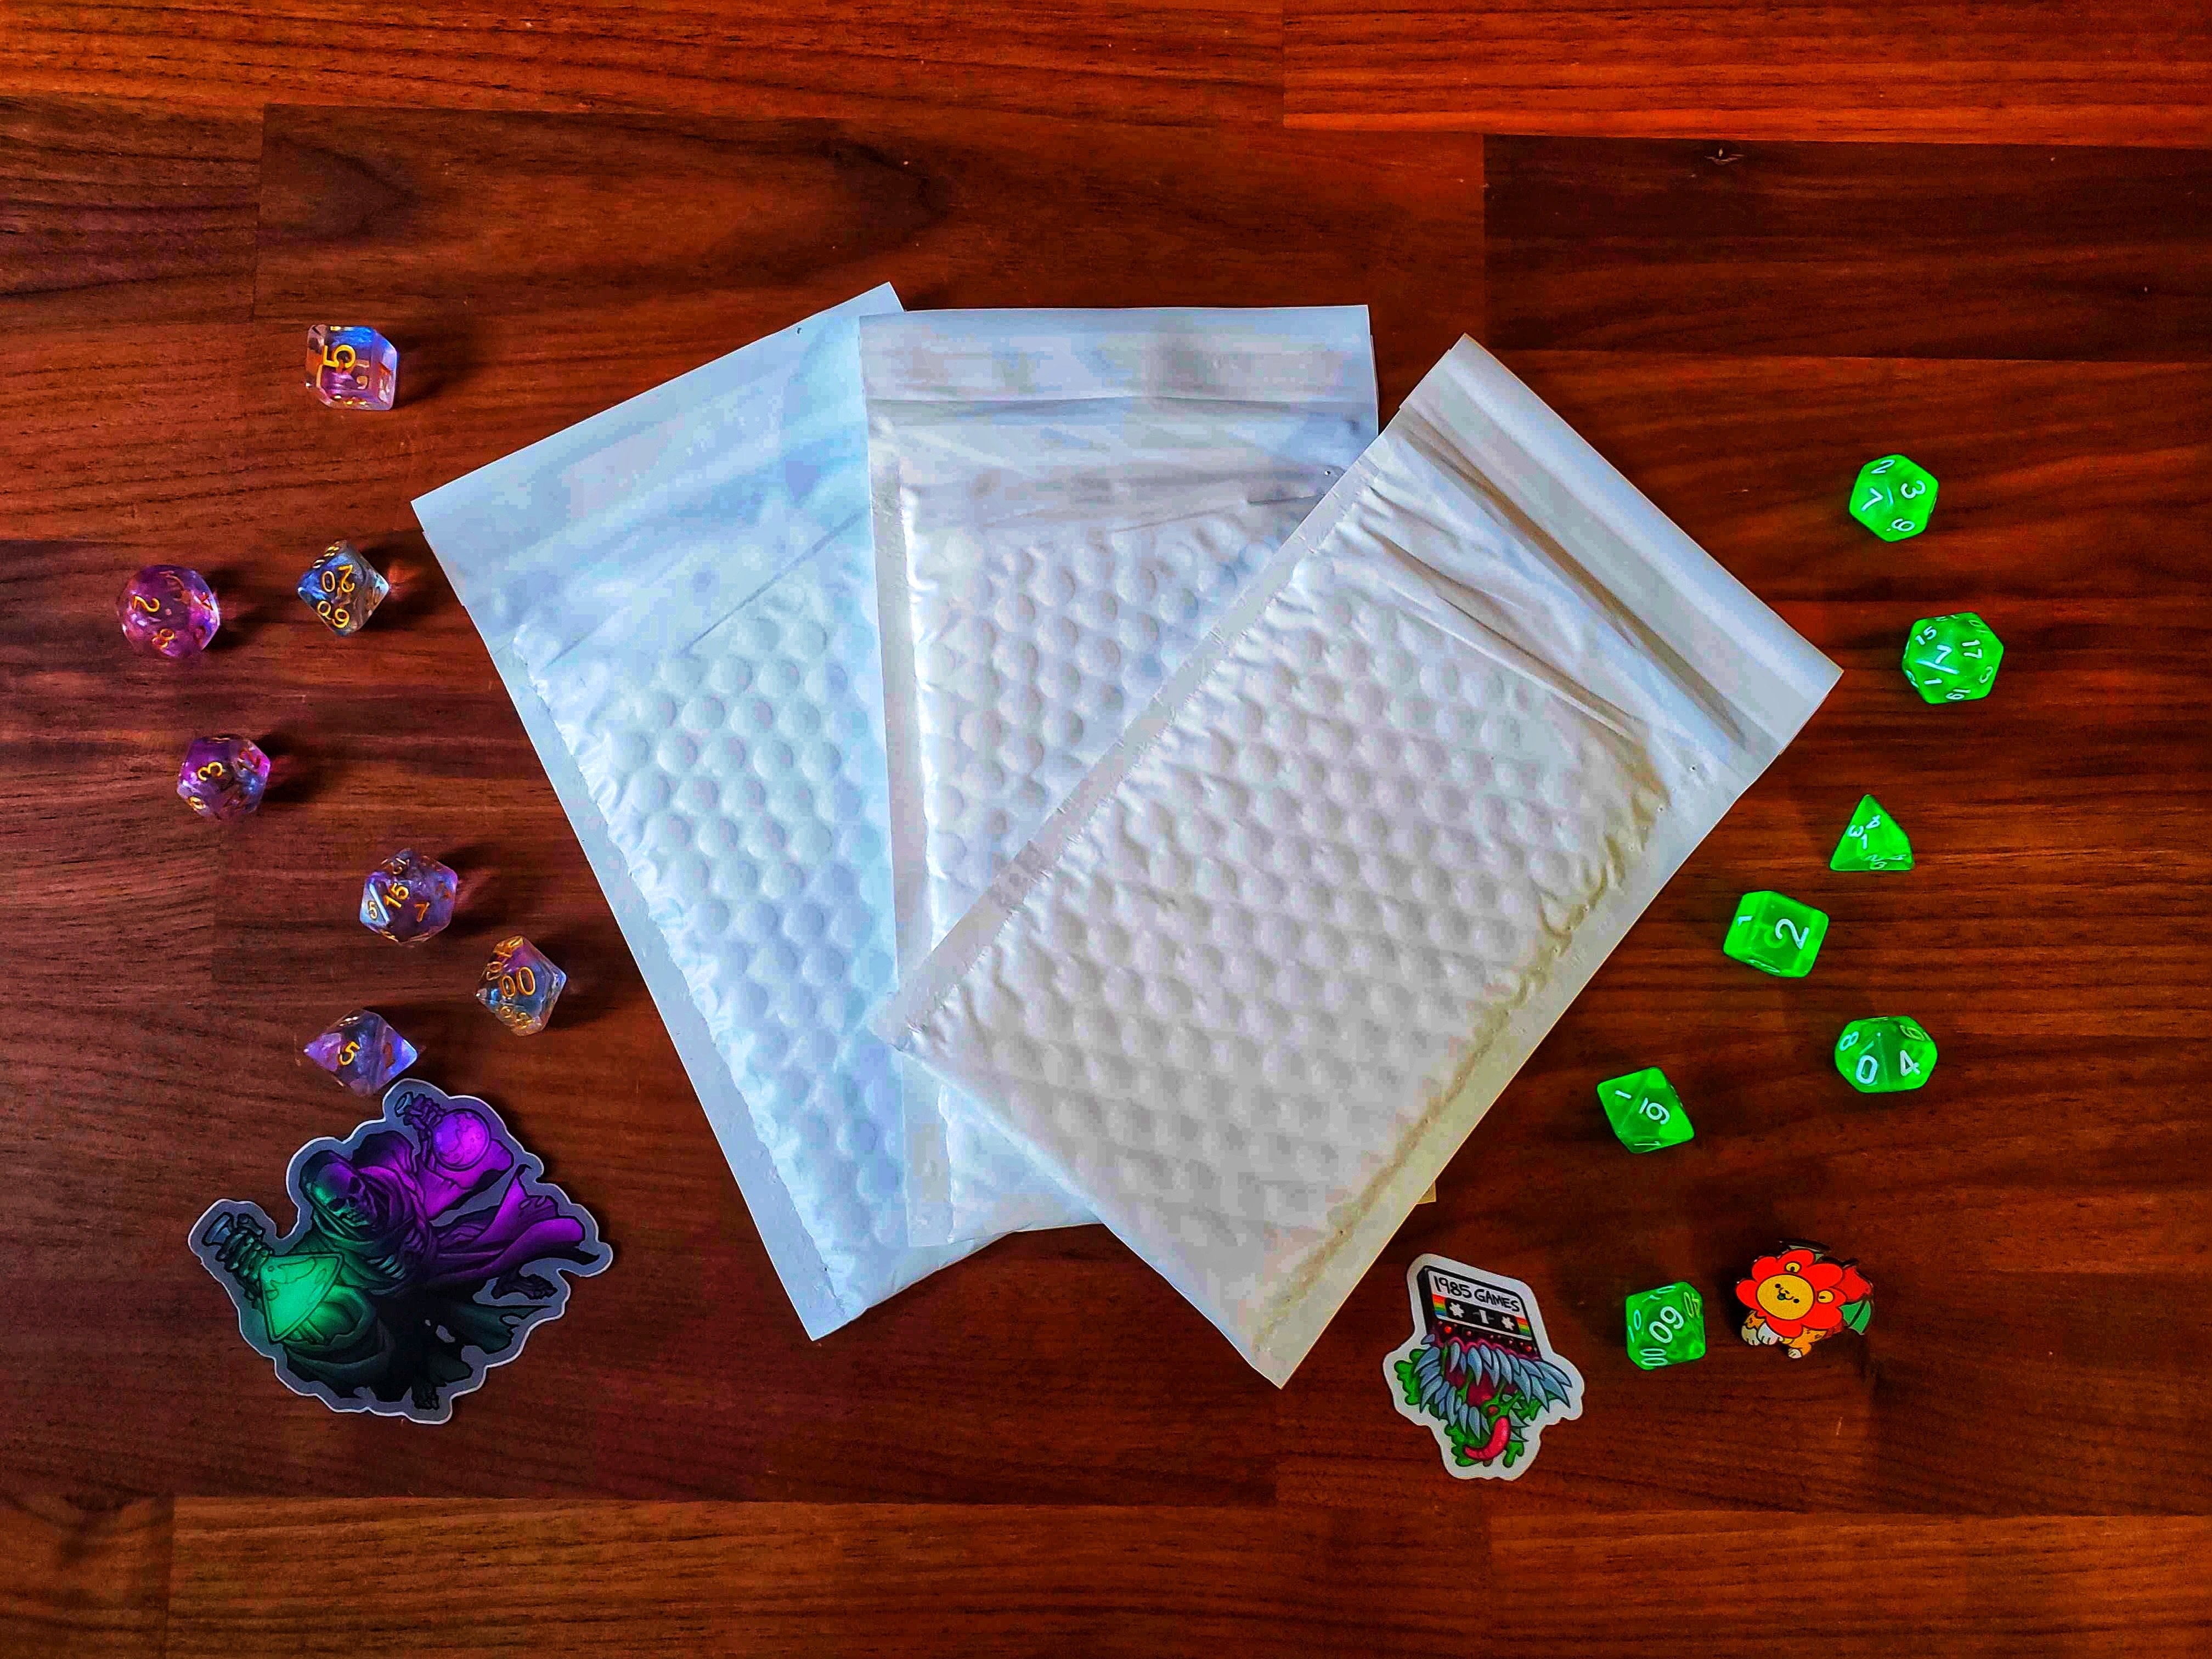 The Endless Bag of Dice